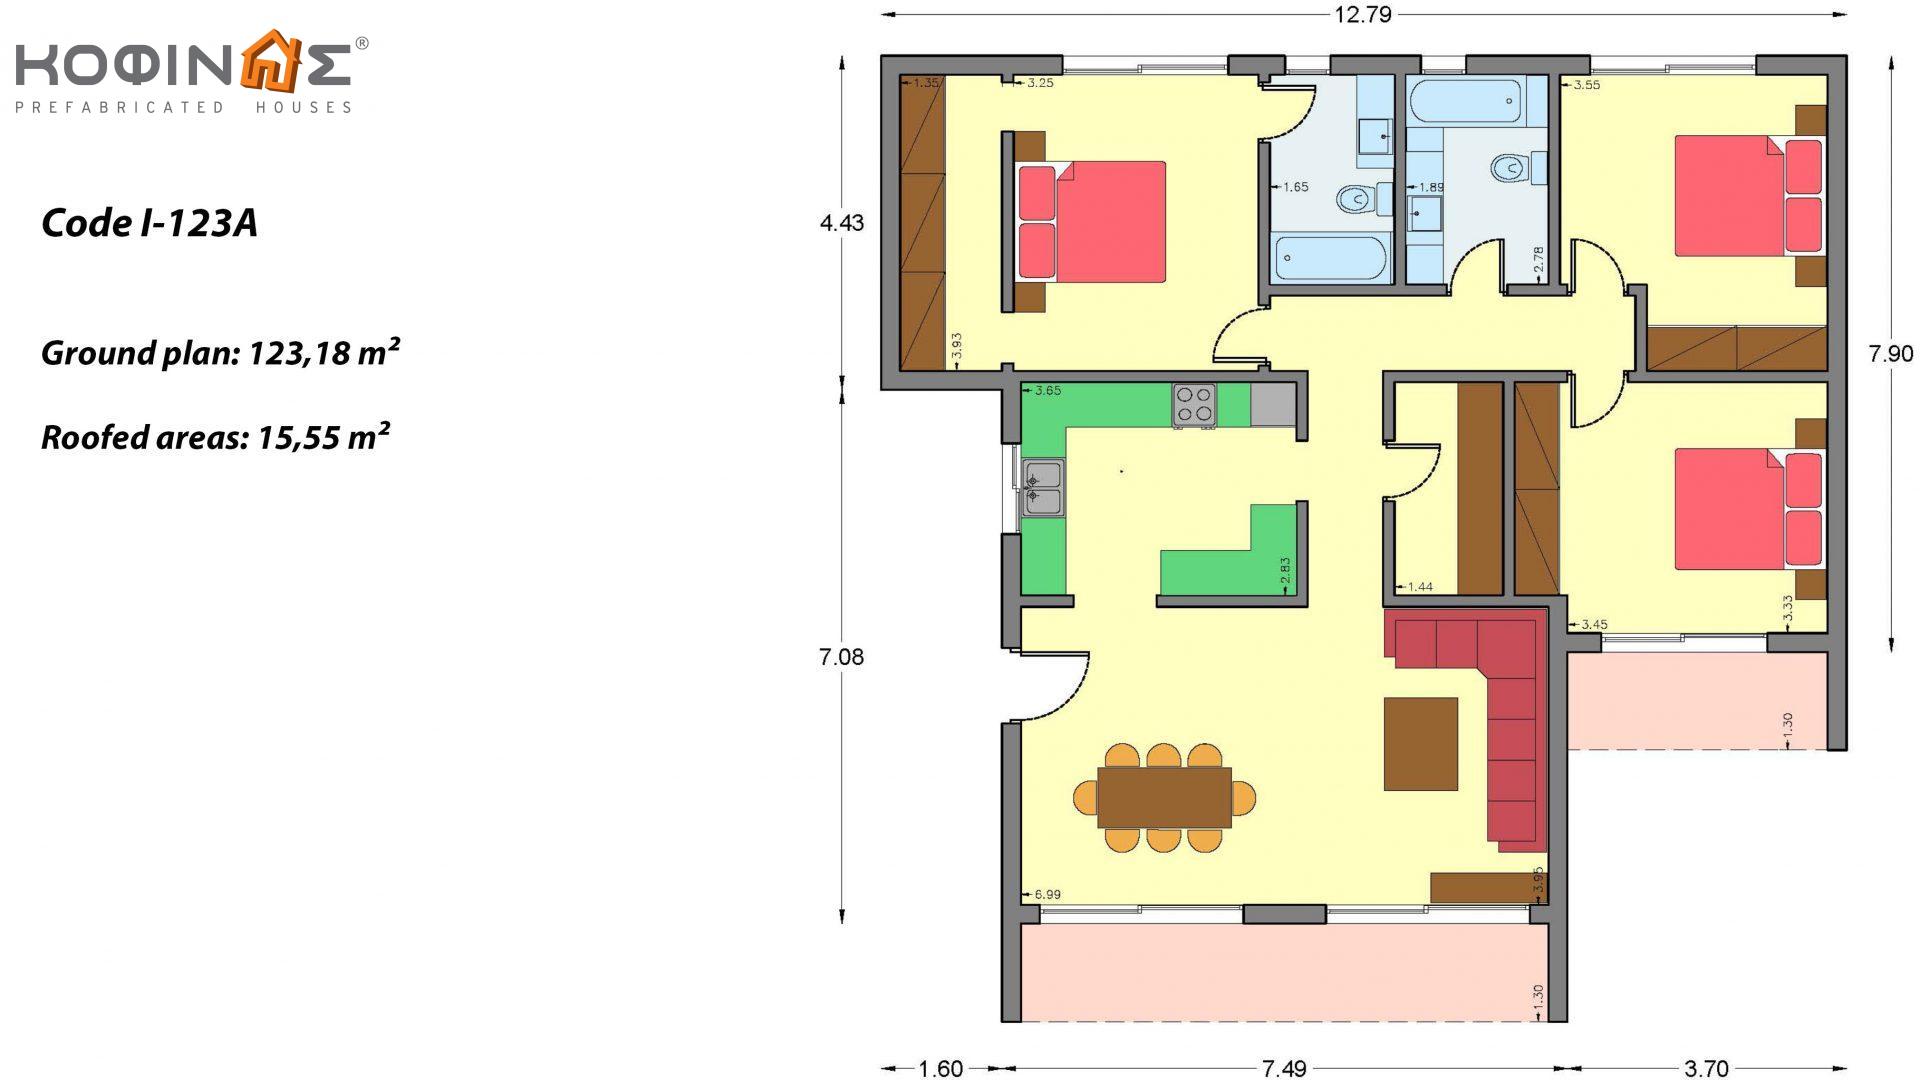 1-story house I-123A, total surface of 123,18 m², covered roofed areas 15,55 m²